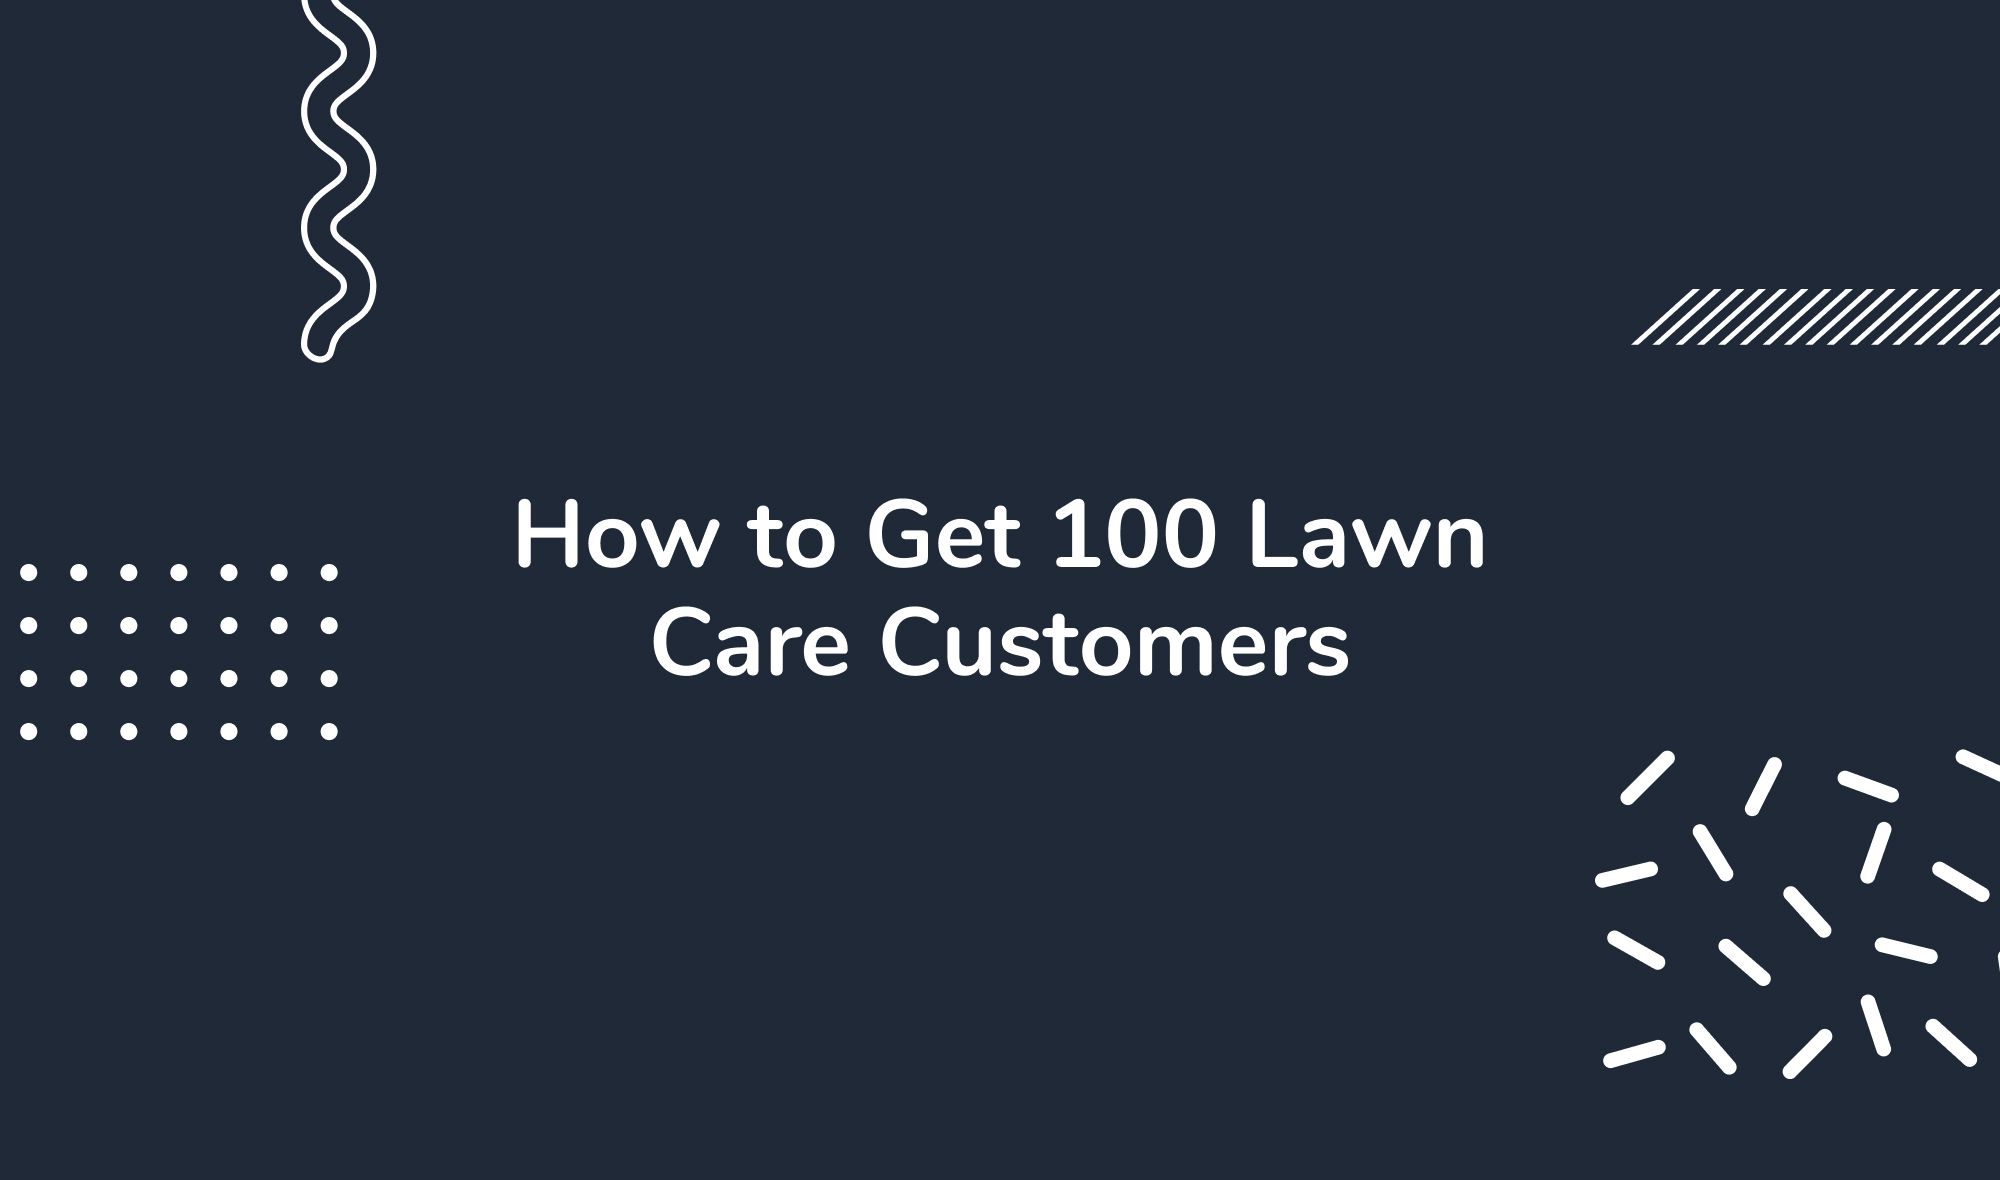 How to Get 100 Lawn Care Customers